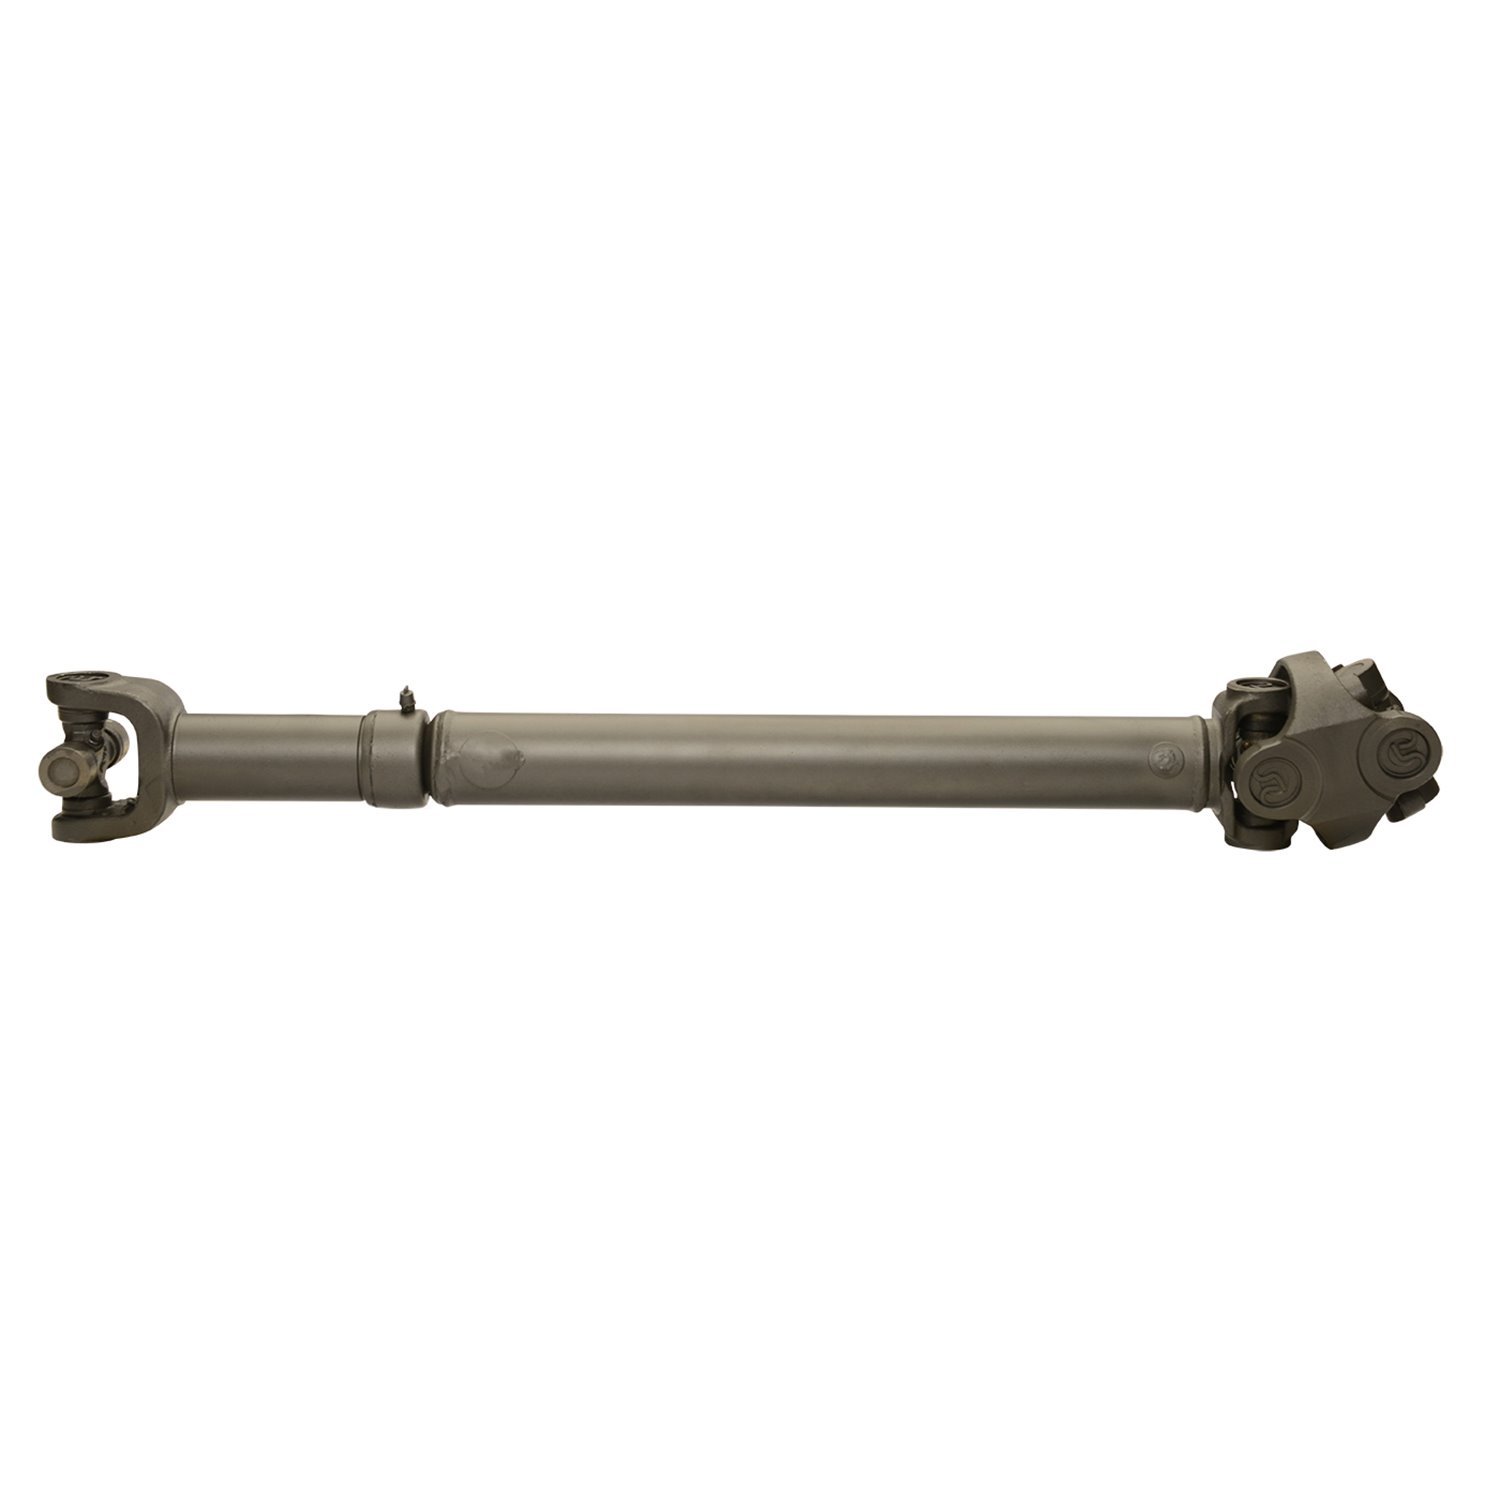 USA Standard ZDS9751 Front Driveshaft, For J10, J20 & Wagoneer, 25.3125 in. Center-To-Center